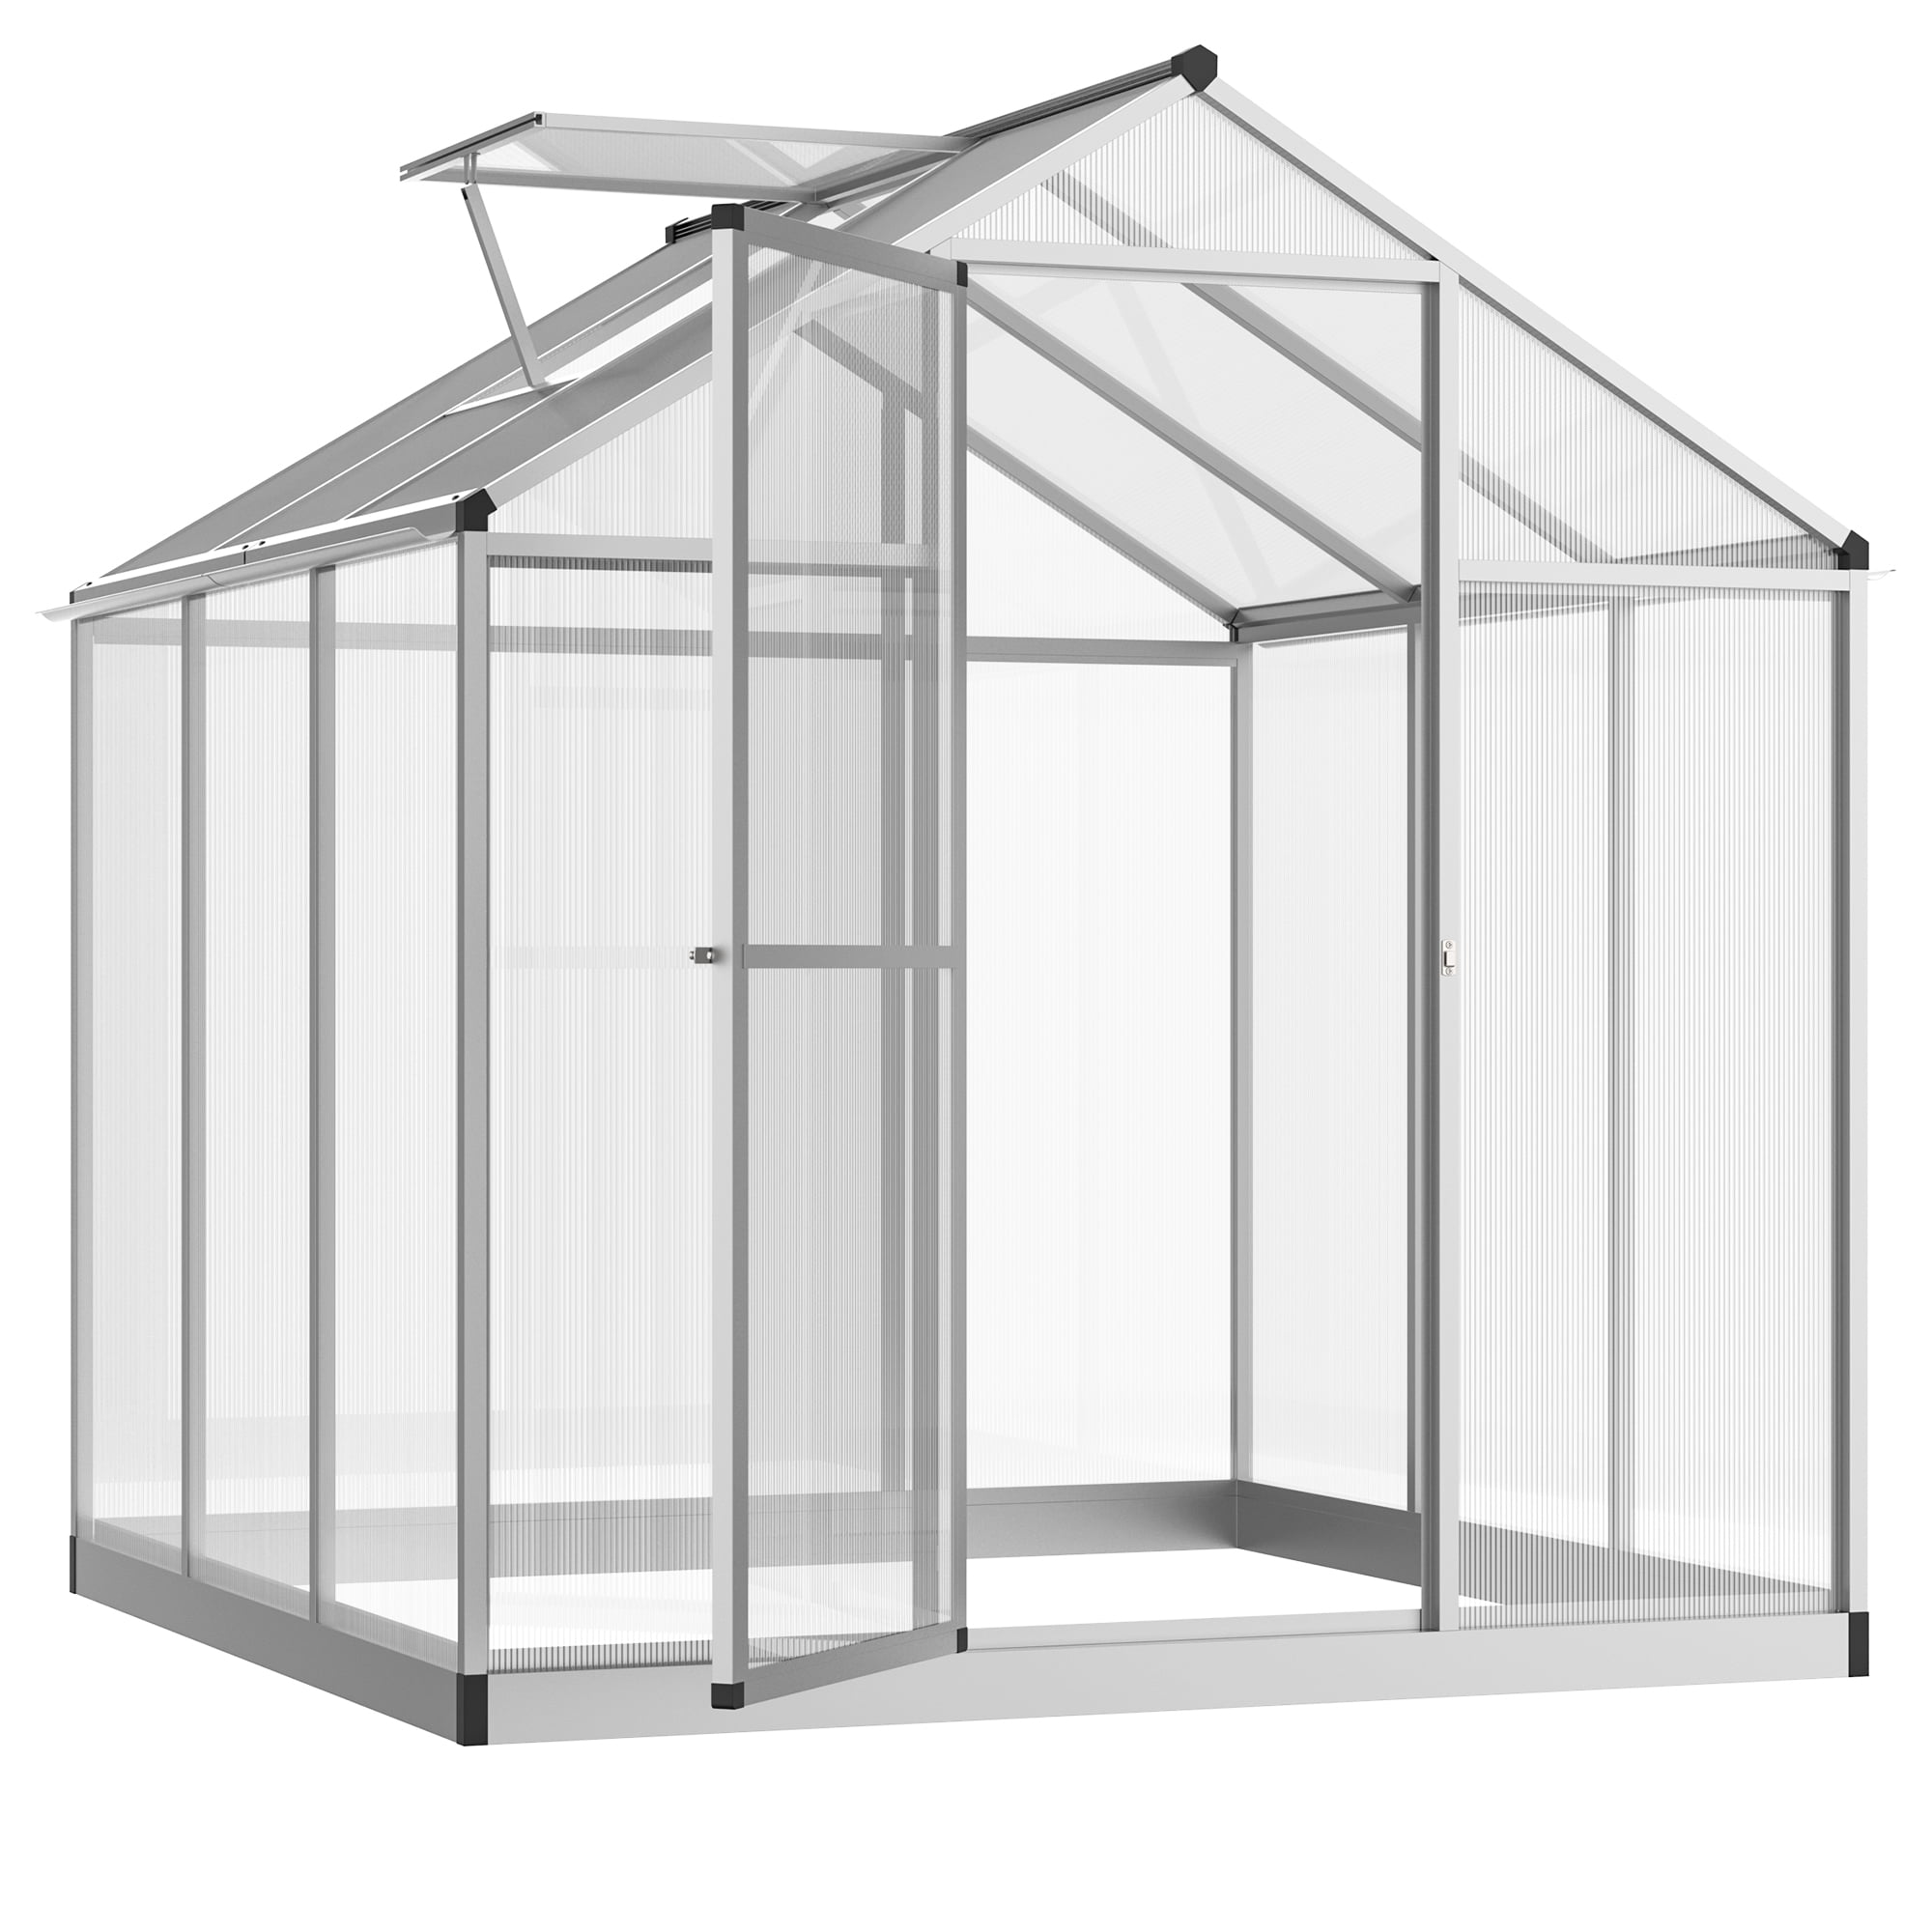 VIVOSUN Hobby Green House with Sliding Door and 2 Ventilation Window 8.2x6.2x6.7 ft for Seedlings Flowers and Plants Outdoor